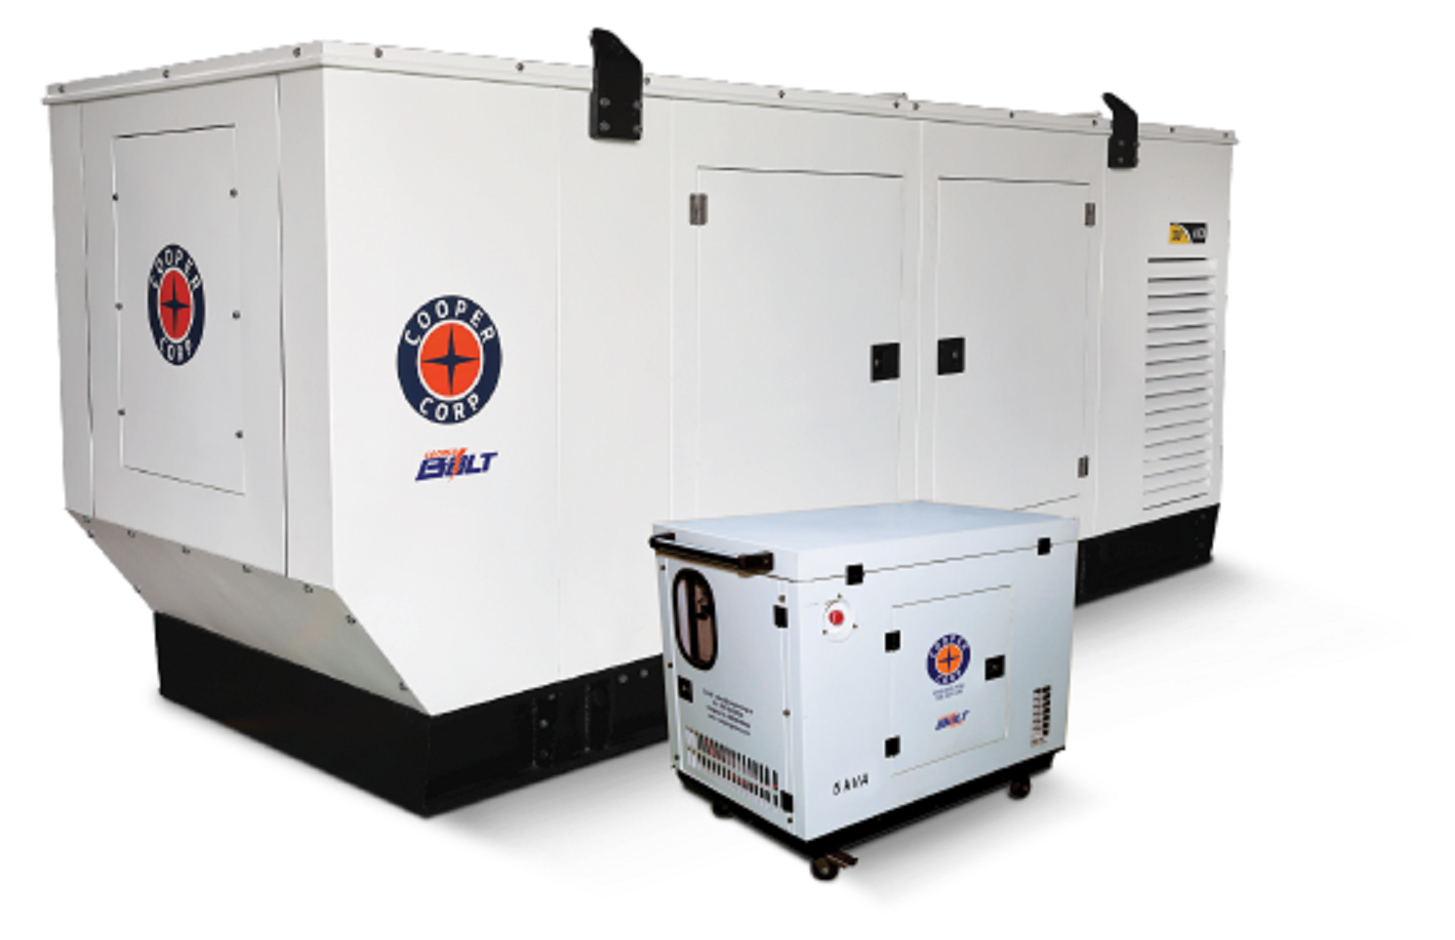 Cooper Corporation Offers a World-Class Genset Series for The Eastern Market, Ranging From 5KVA To 250KVA.